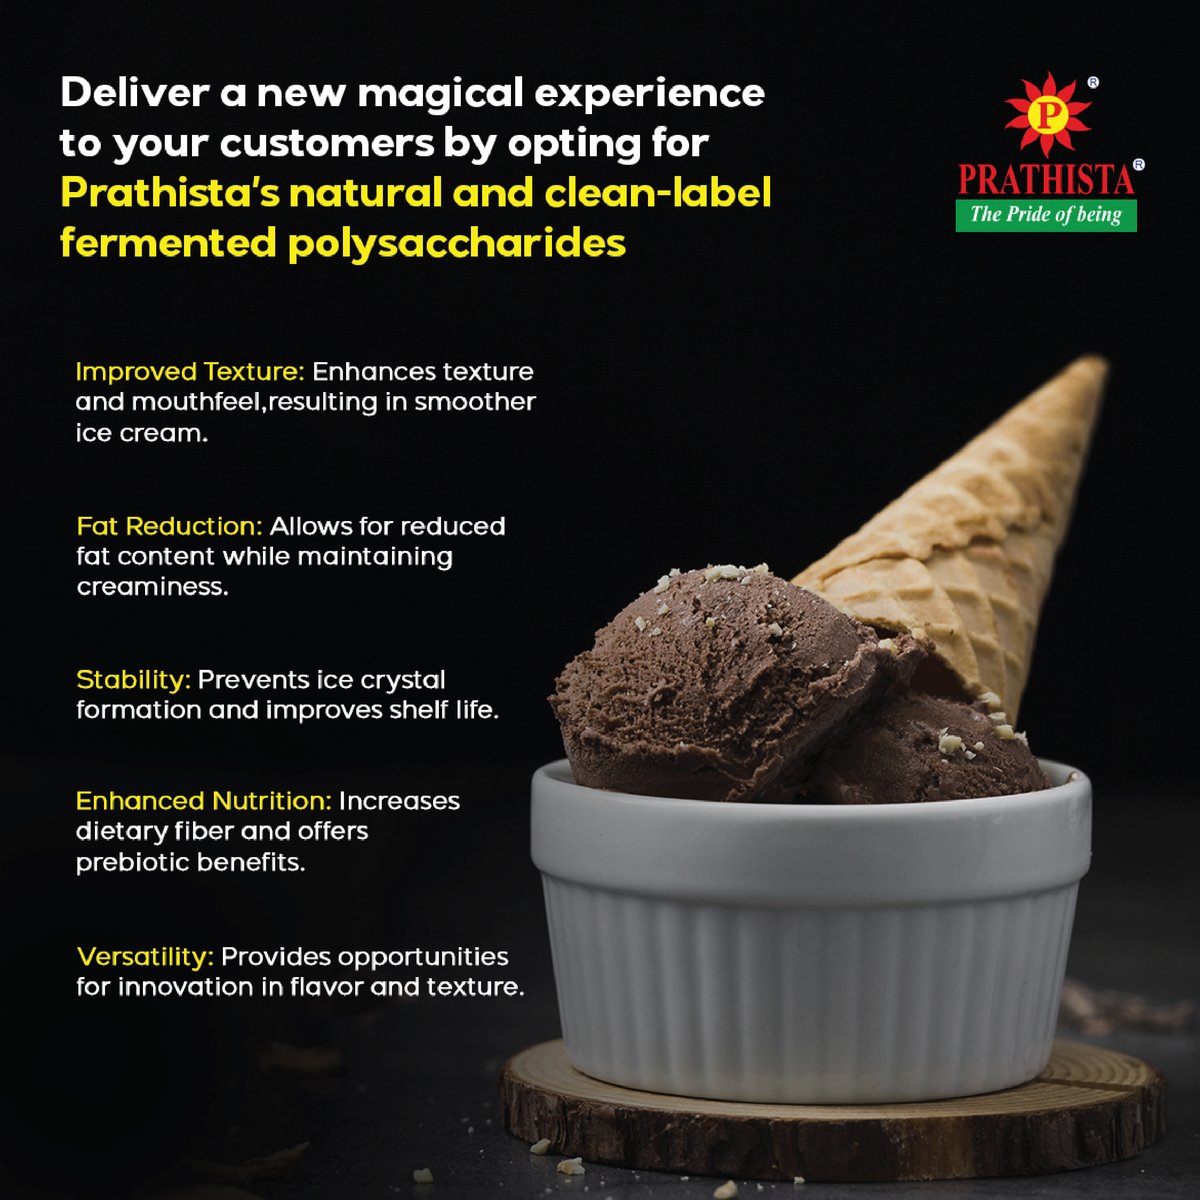 Prathista's natural and clean-label fermented polysaccharides redefine ice cream, delivering a magical experience. 

#fermentedfoods #icecreamlover #IceCreamParlour #icecreamaddict #cleanlabel #naturalsweeteners #bakeryshop #bakeryandcafe #prathistaindustrieslimited